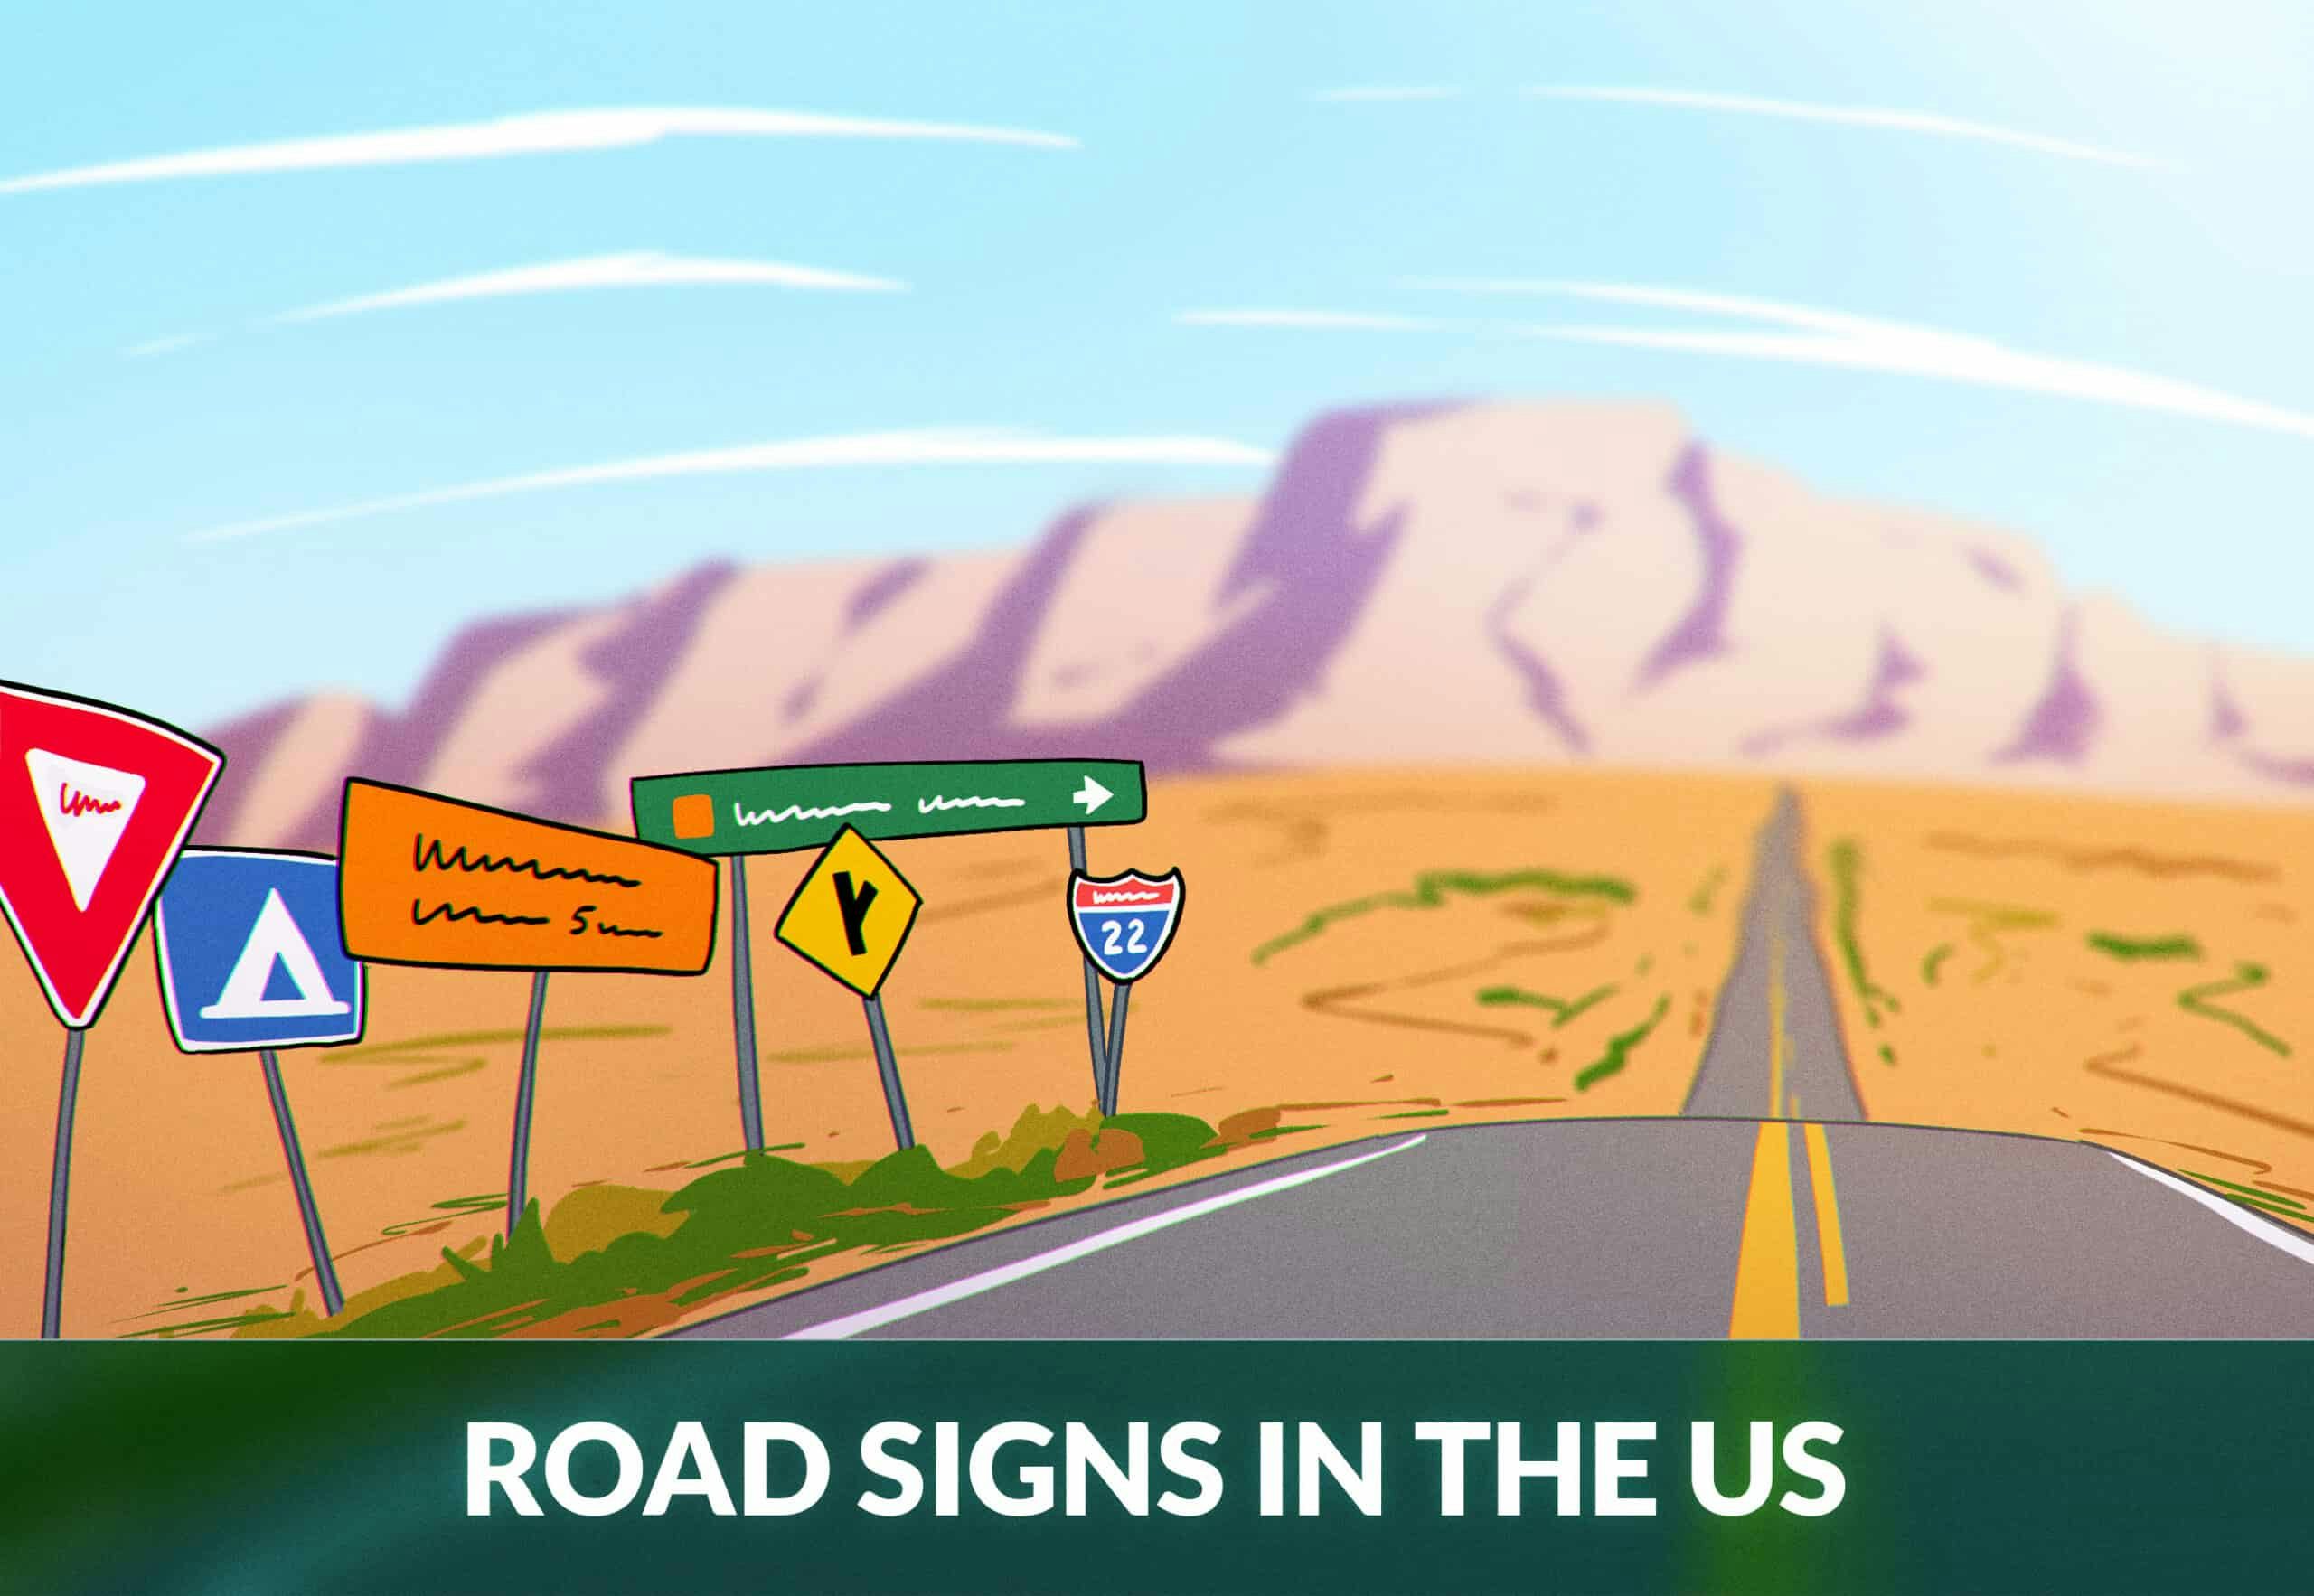 US ROAD SIGNS EXPLAINED